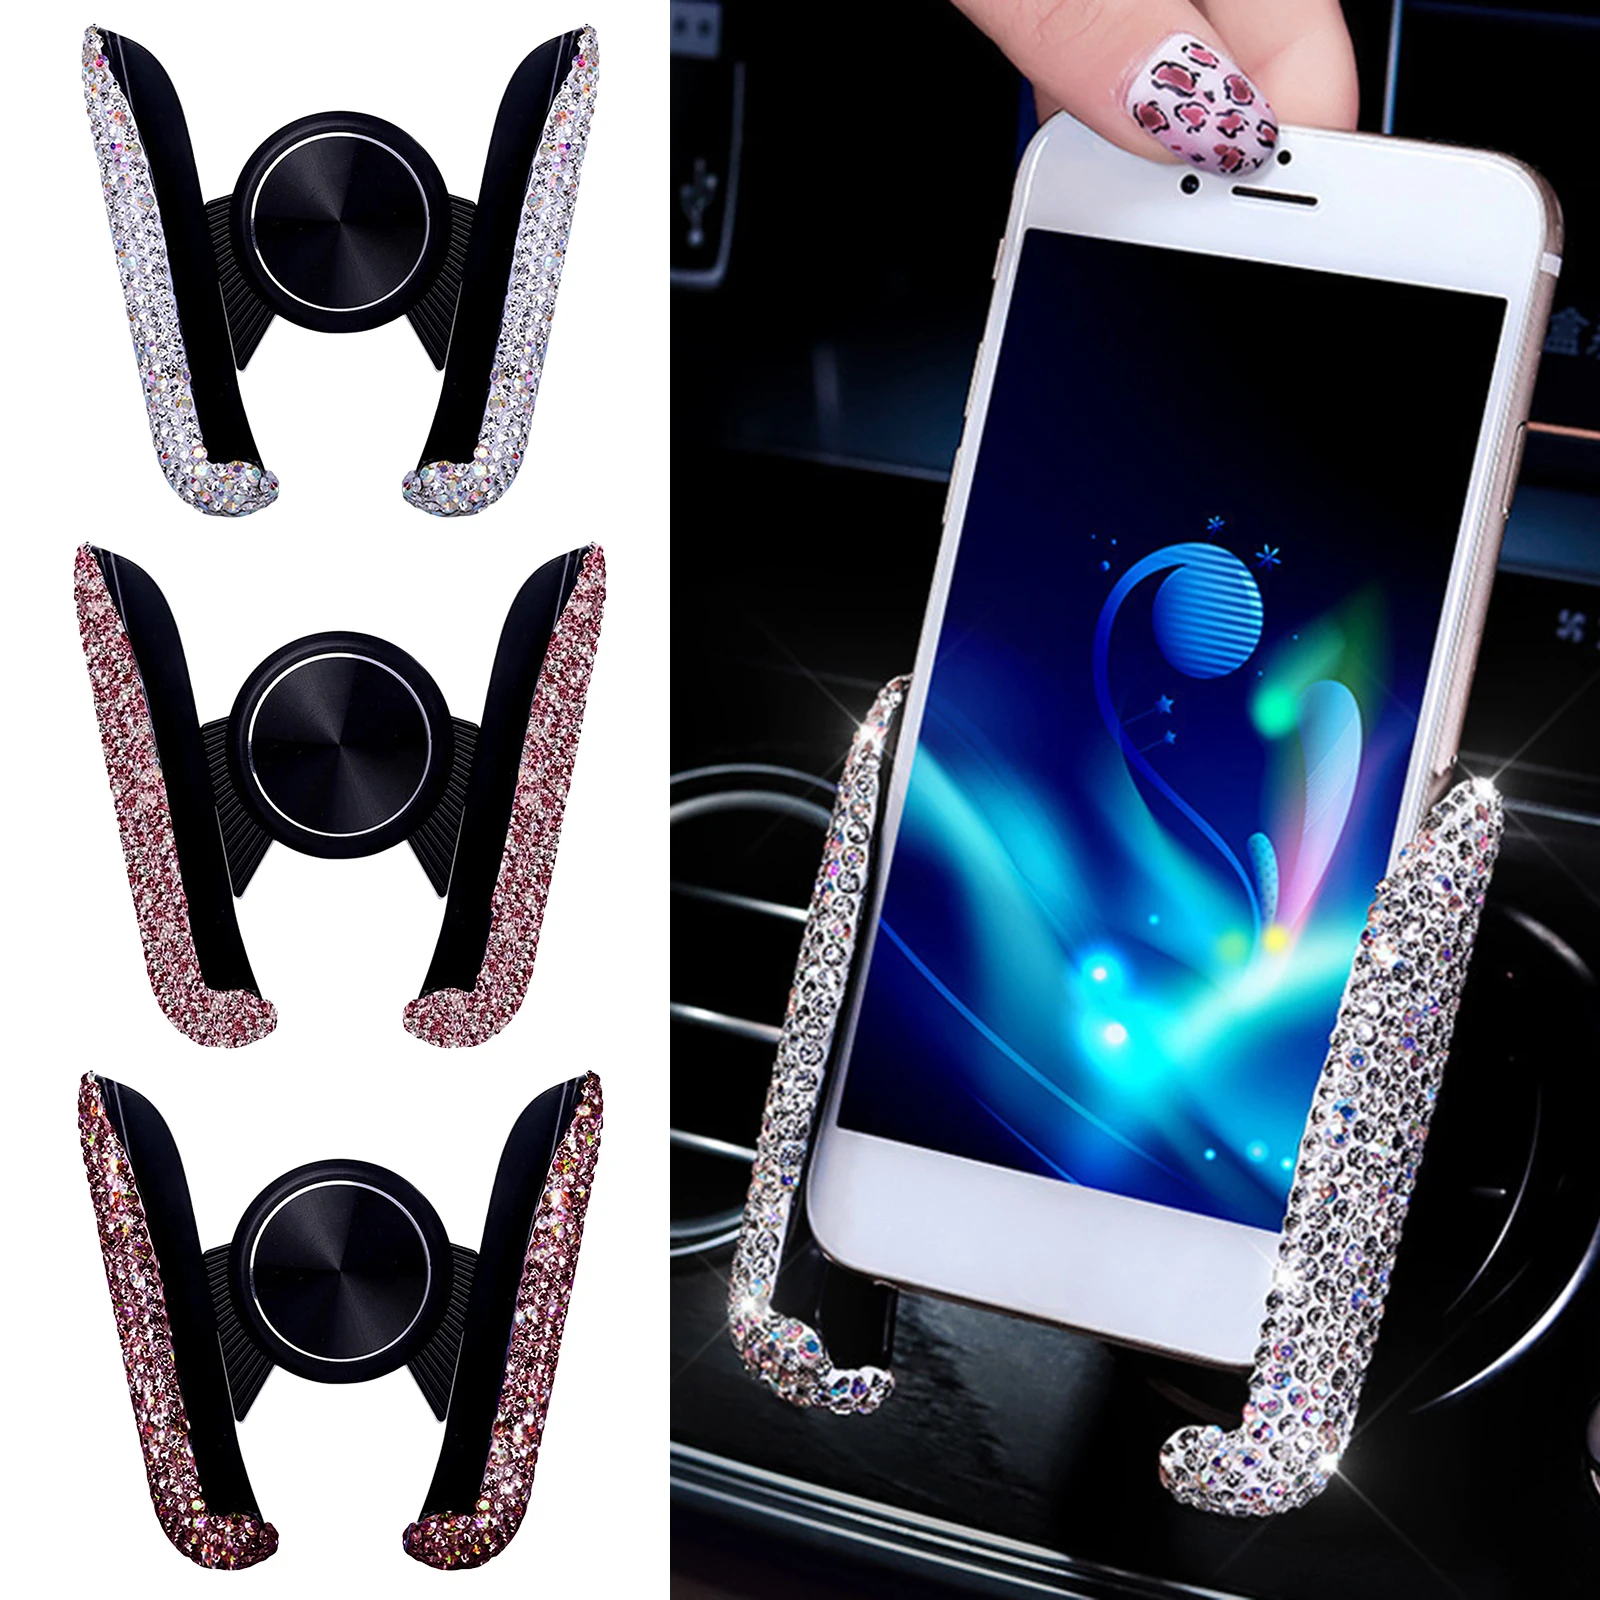 Universal Auto Phone Holder Car Air Vent Clip Mount Mobile Phone Holder Cell Phone Stand Support For iPhone